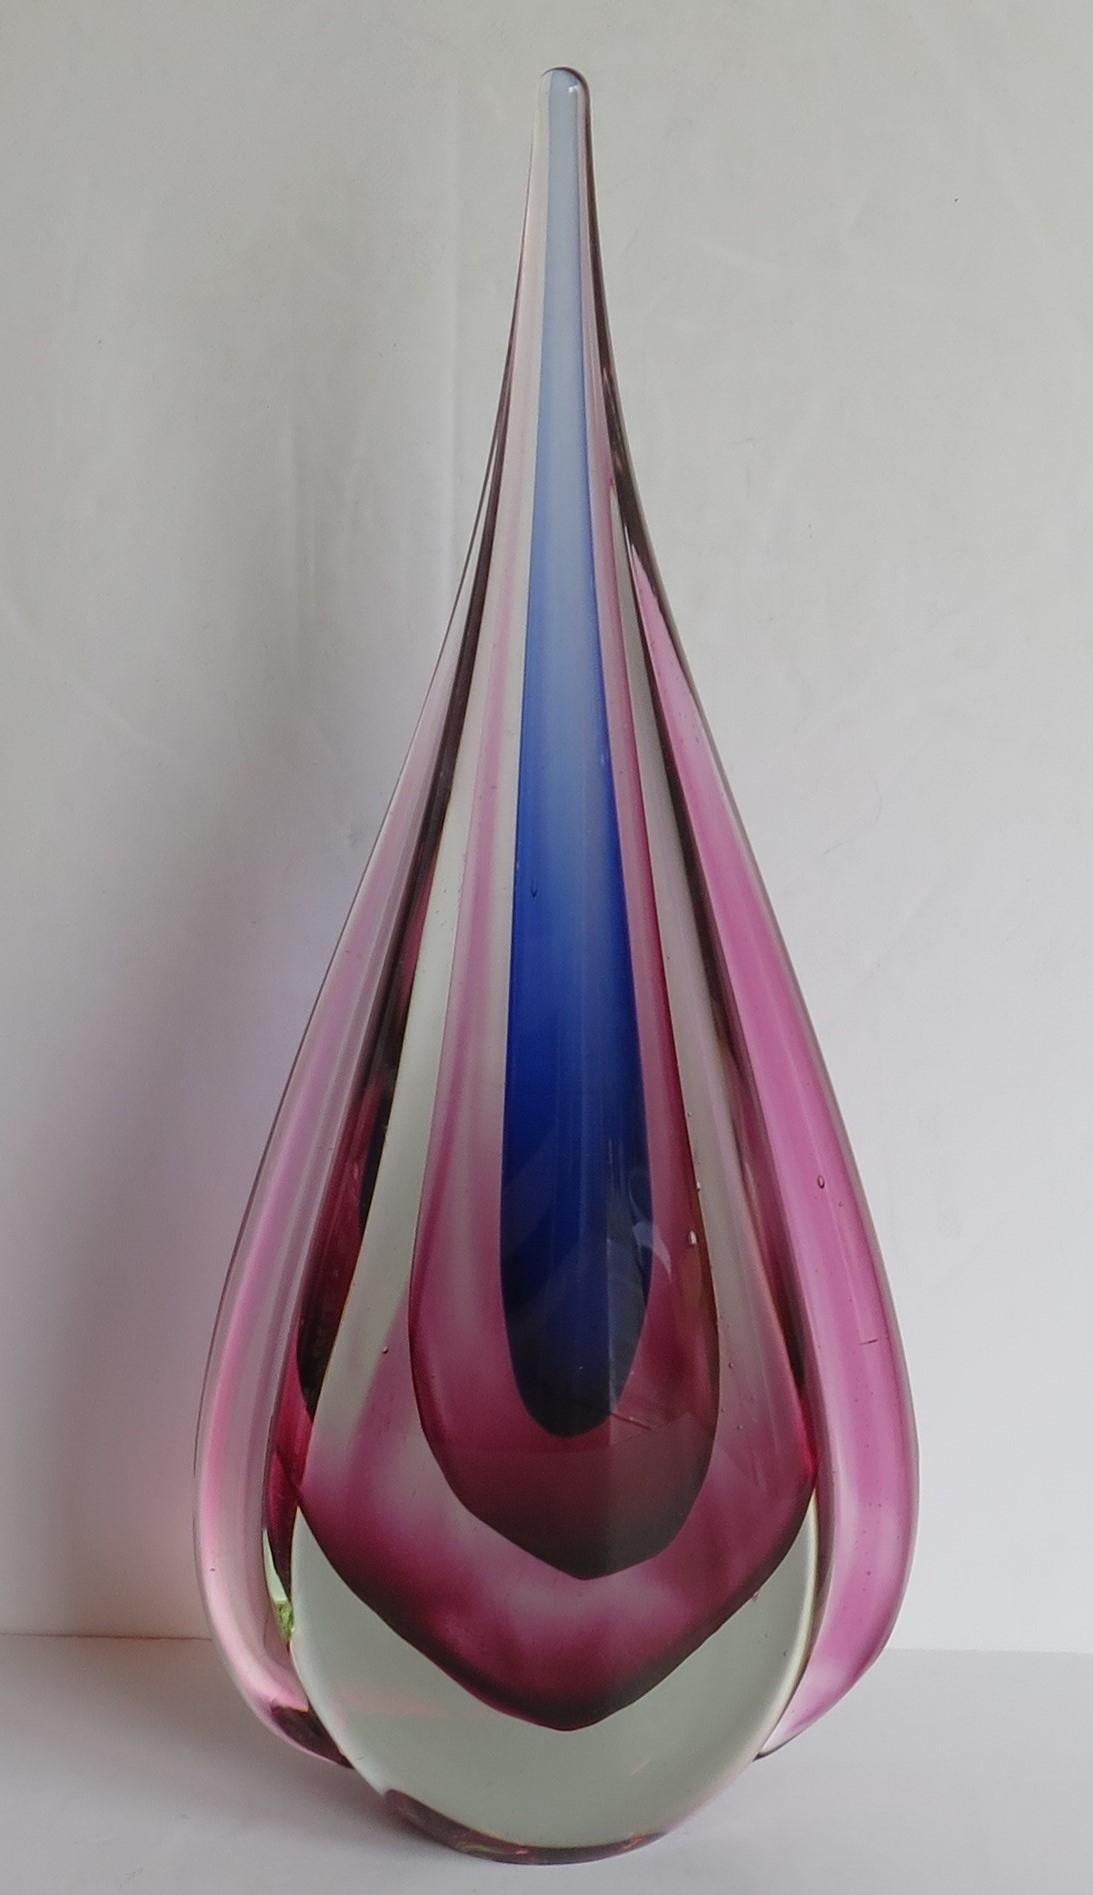 Tall Murano Glass Sommerso Teardrop Sculpture by Flavio Poli, Italy, circa 1950s For Sale 3